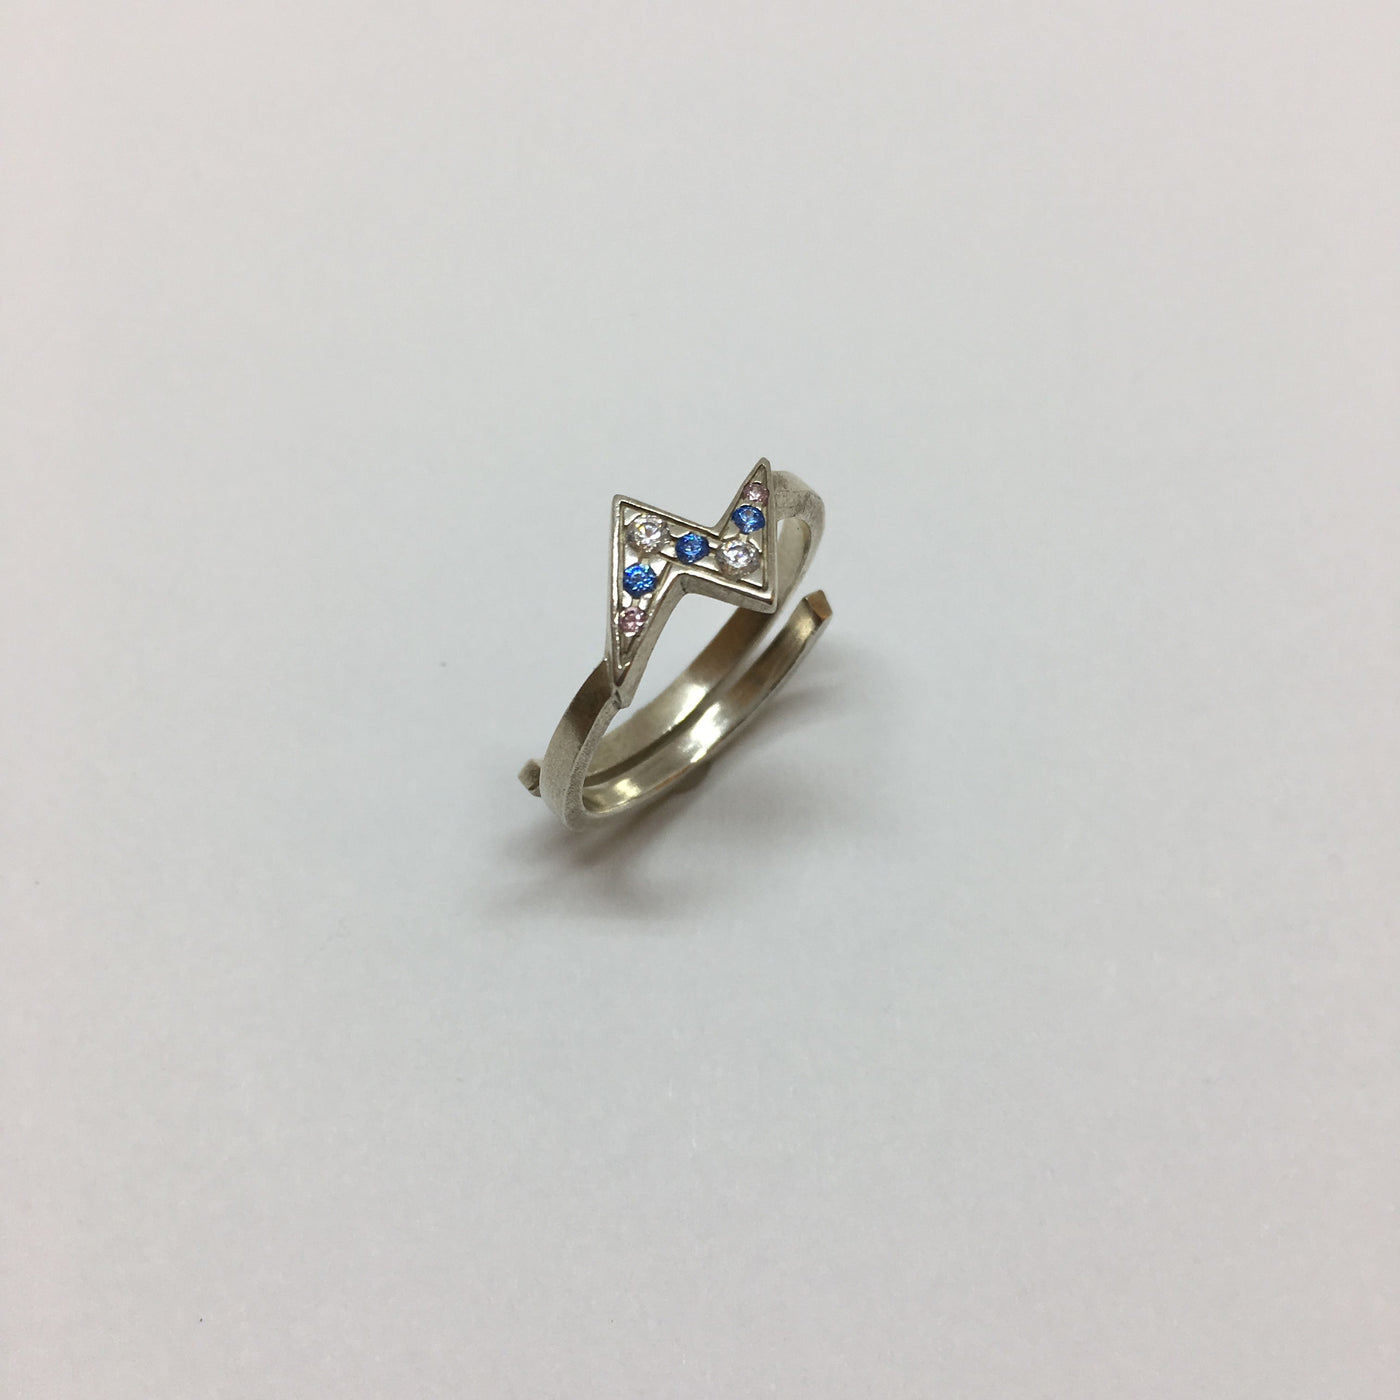 Silver Flash ring with blue zirconia